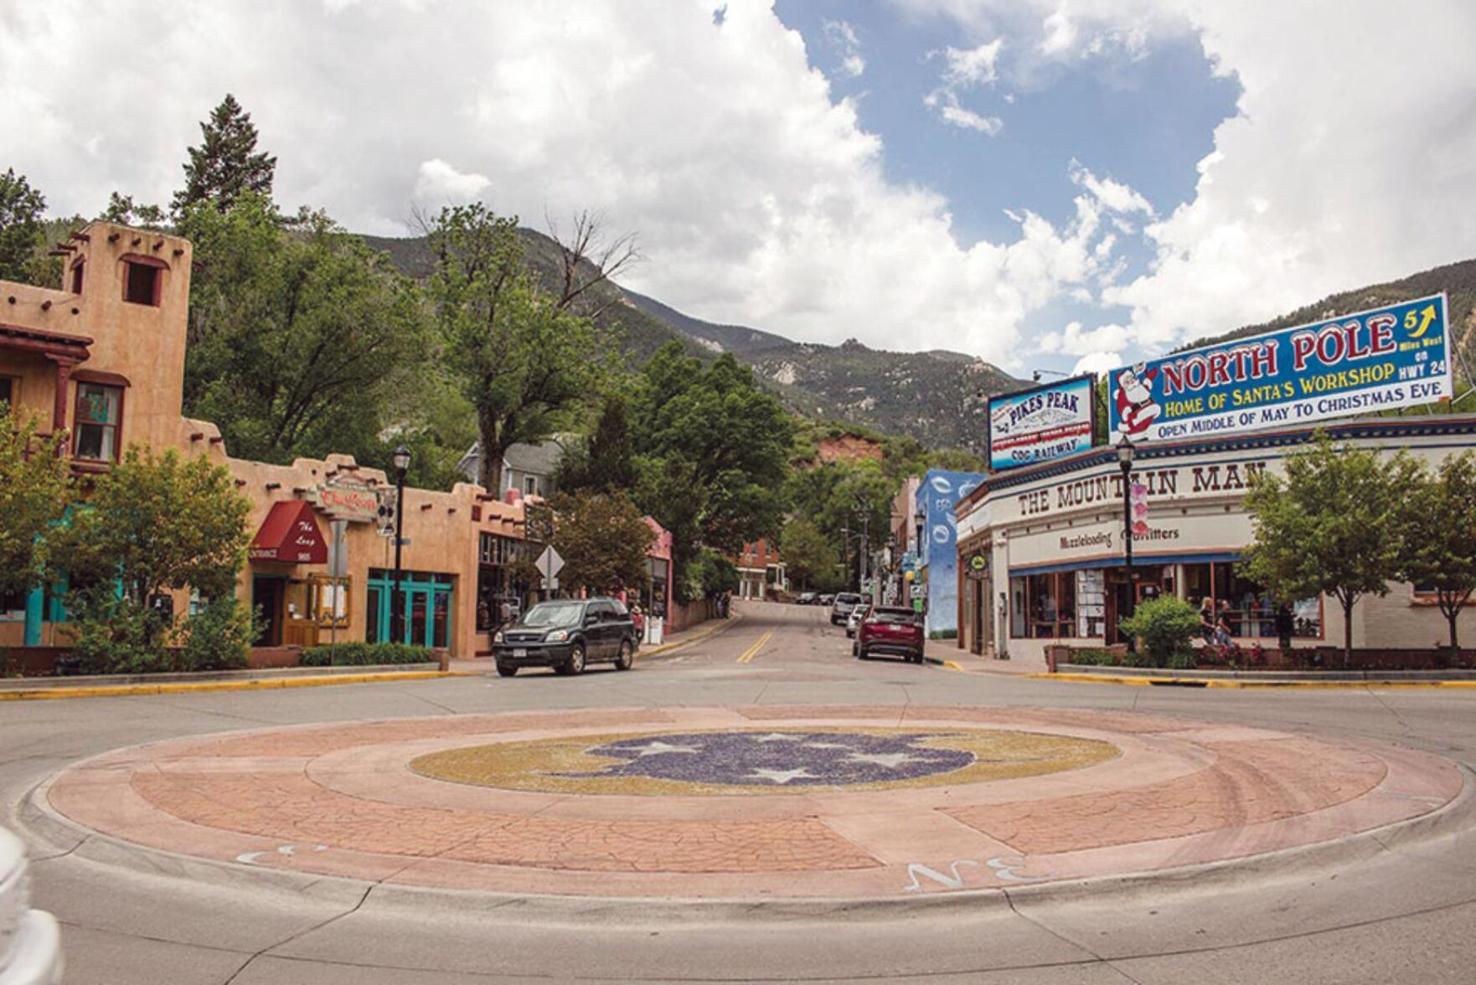 Manitou Springs ranks among America’s top 10 small town arts scenes